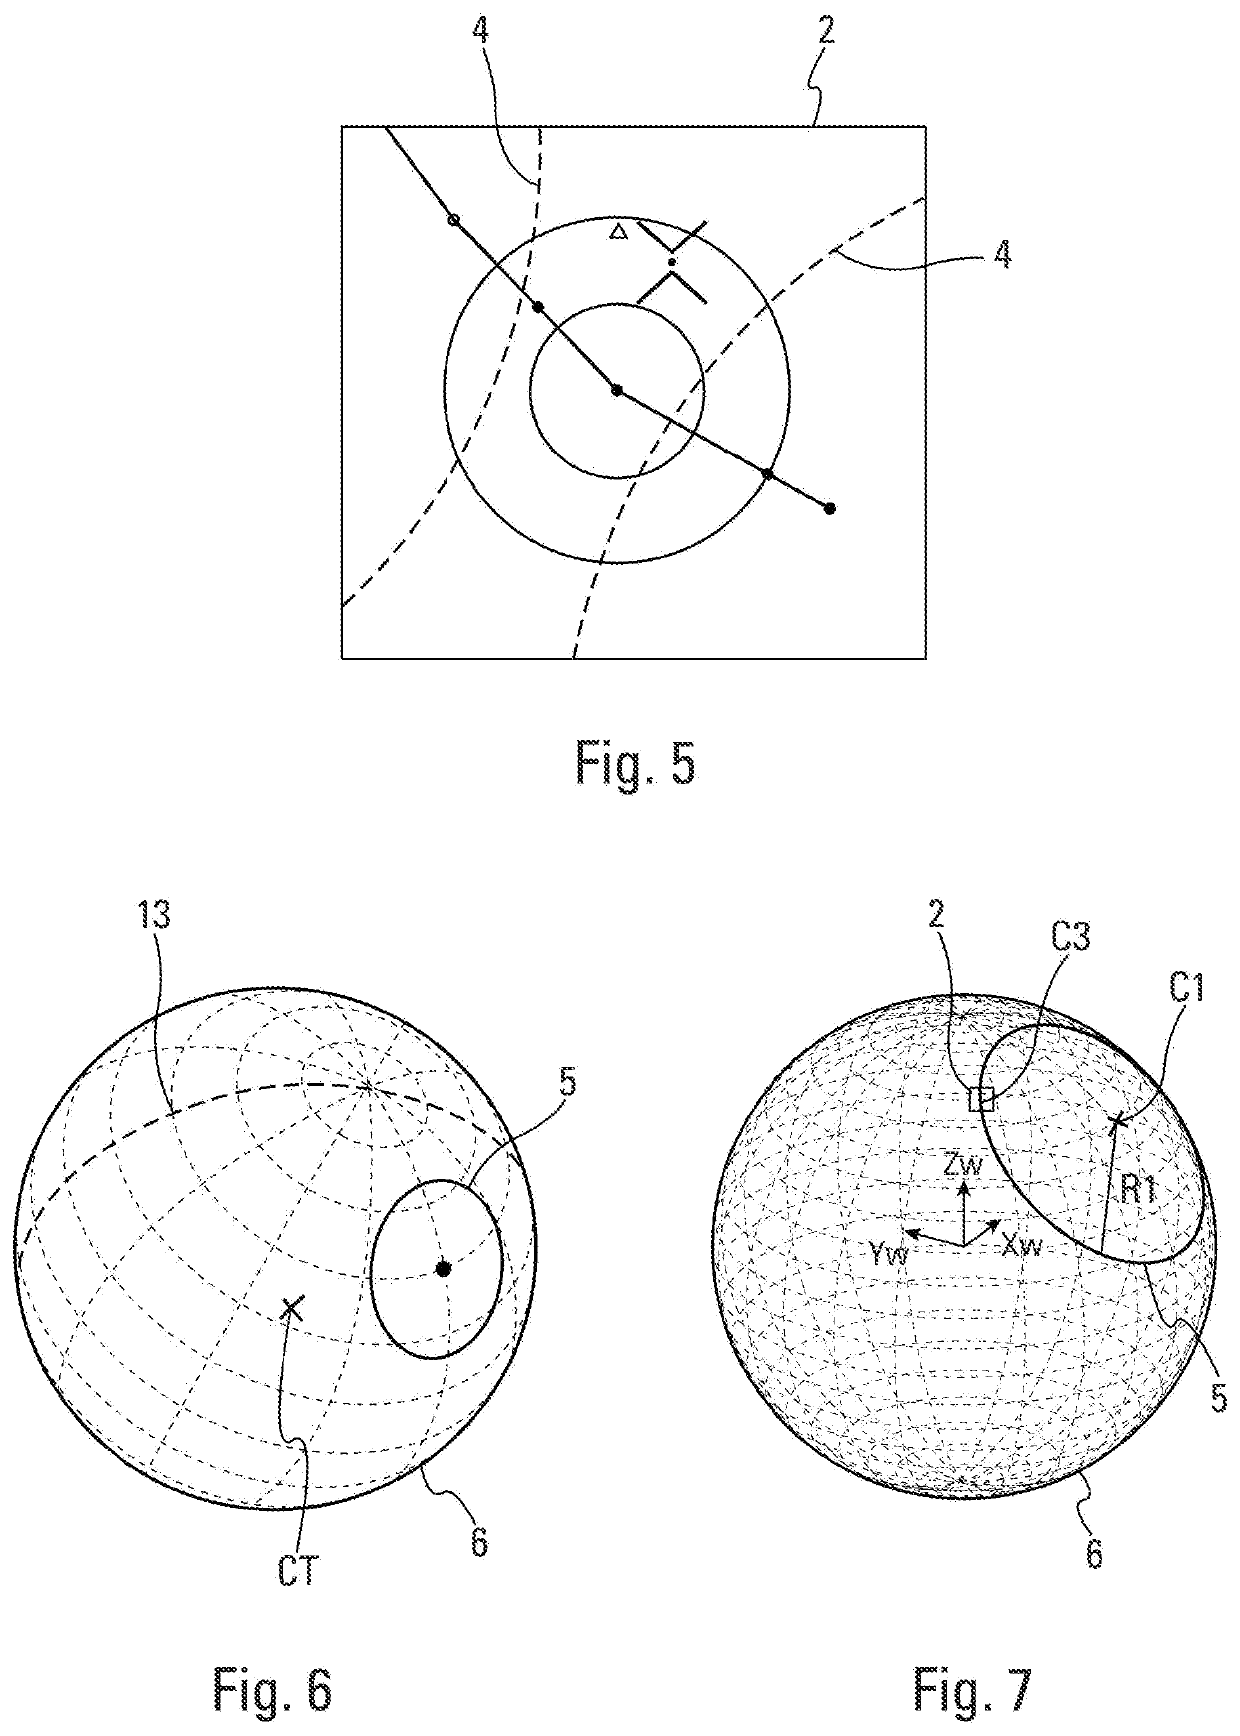 Method and system for generating a display comprising a curve representative of a circular limit on a terrestrial surface